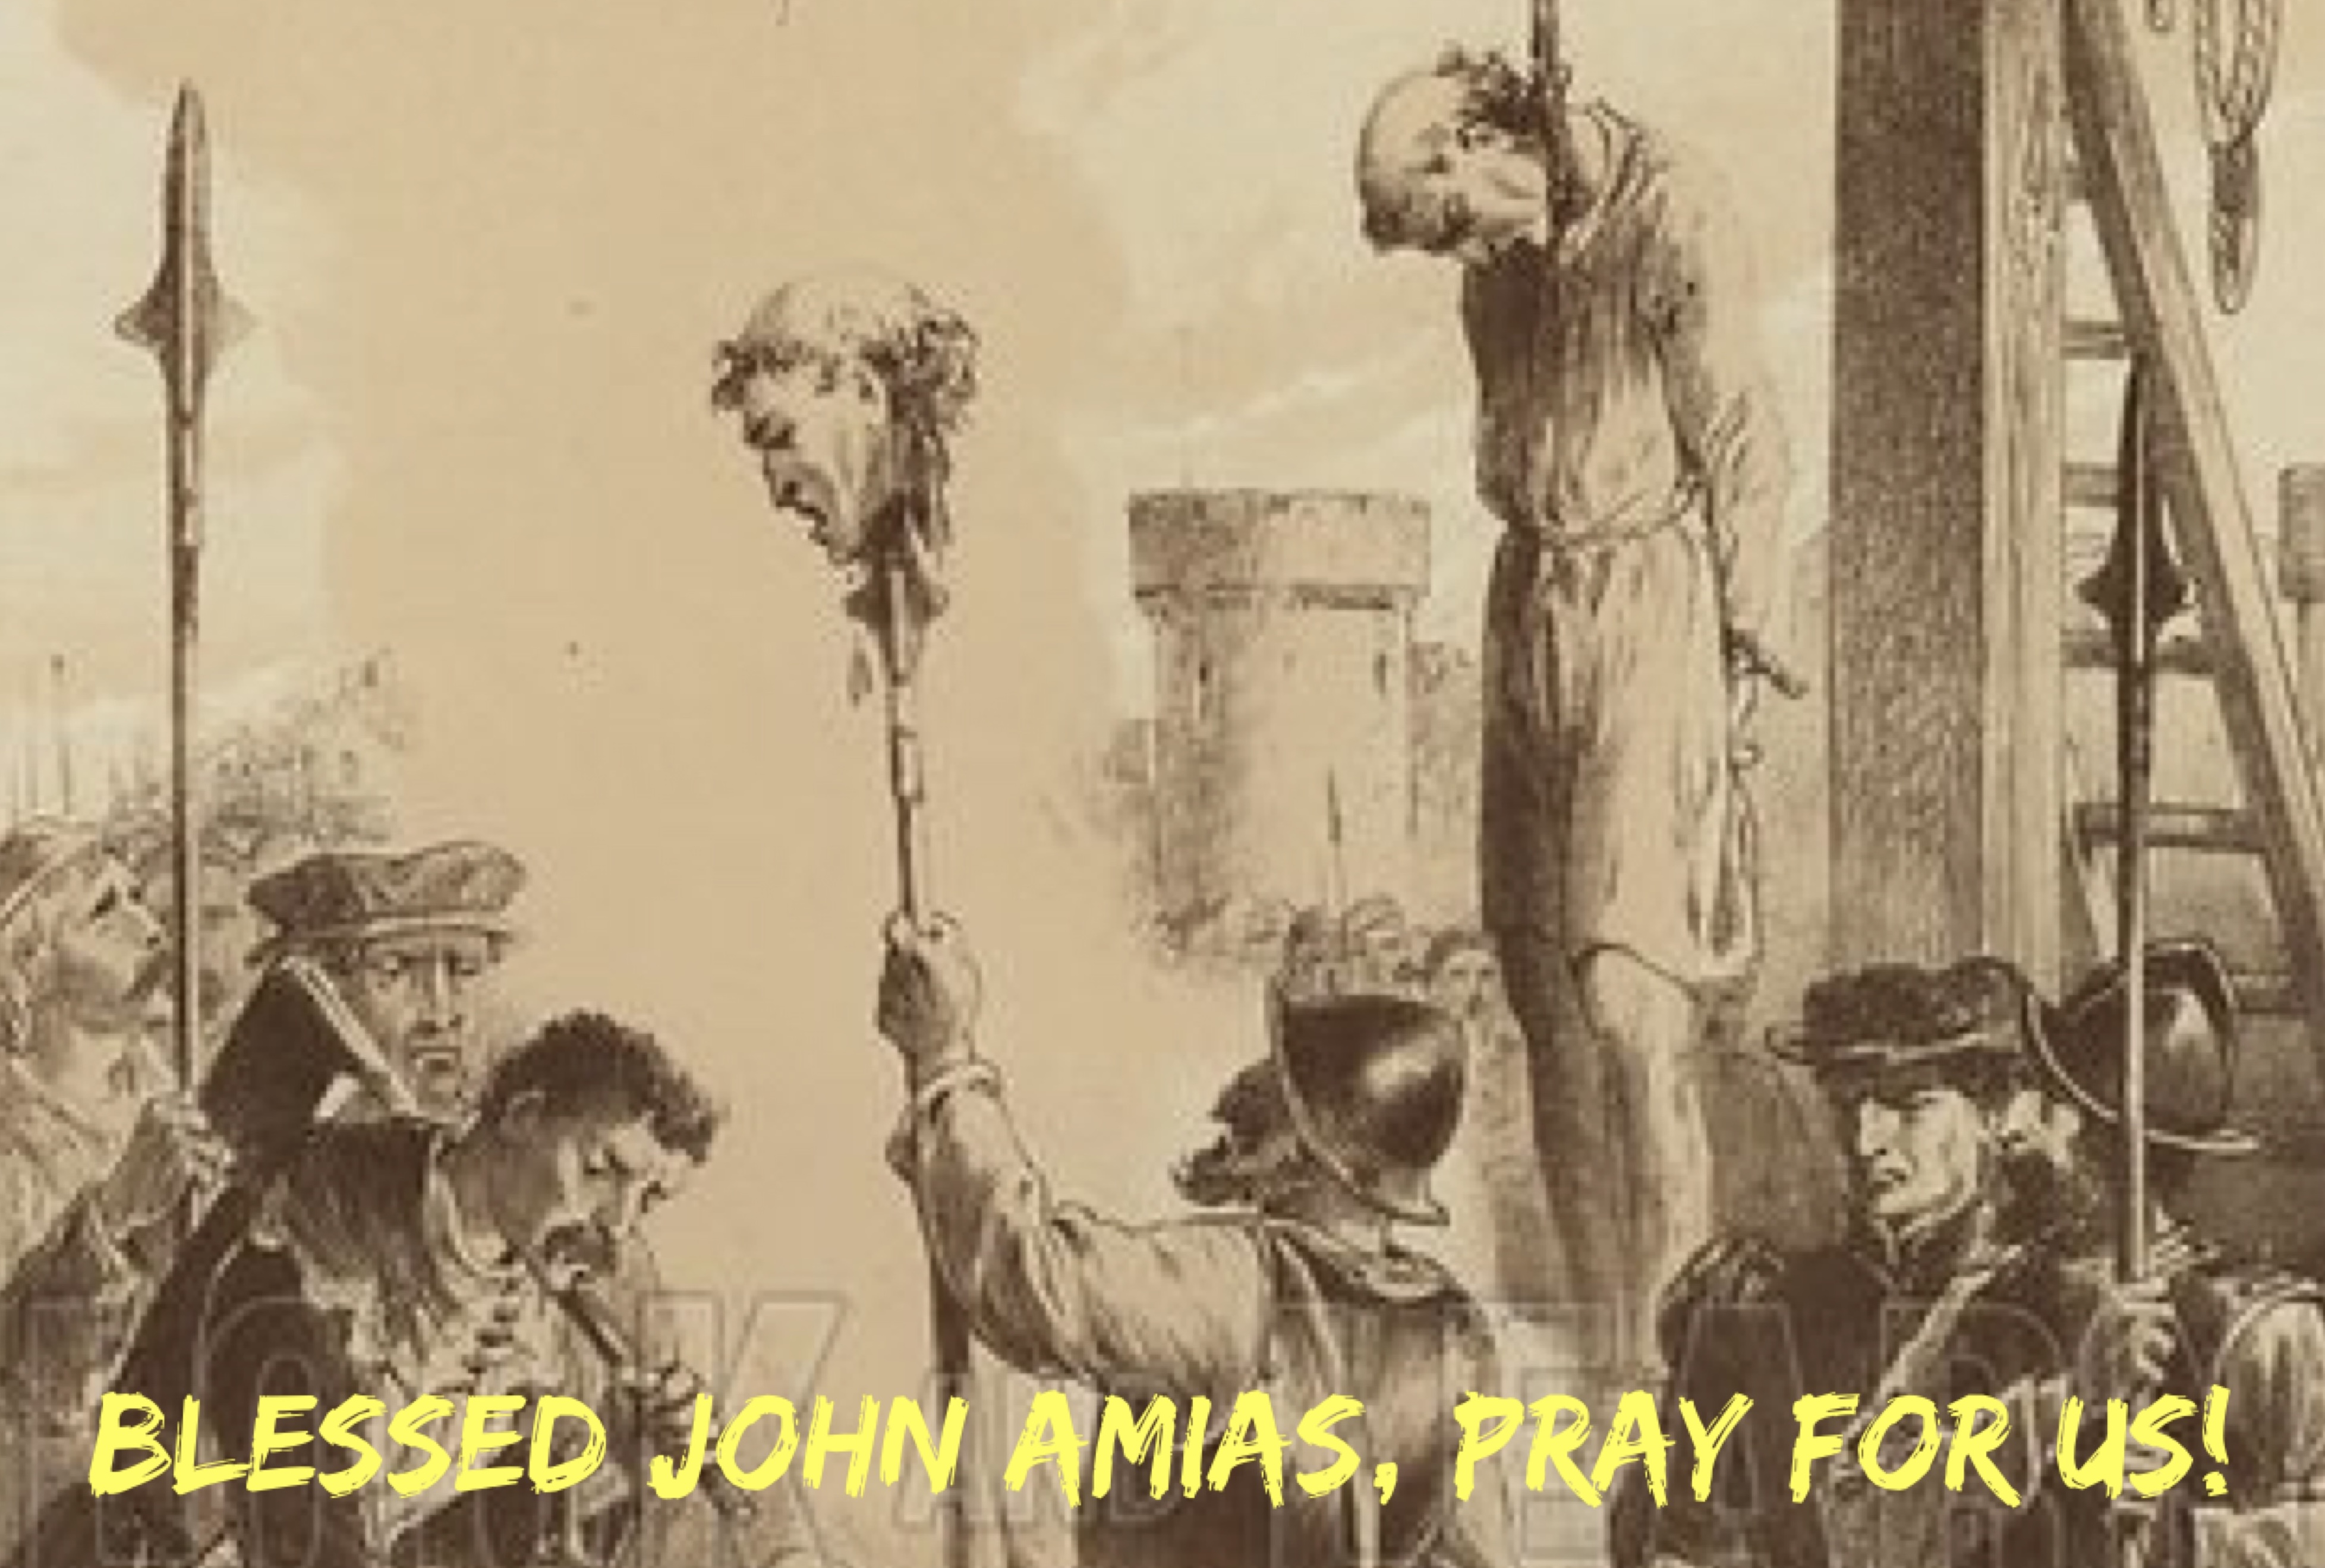 16th March – Blessed John Amias